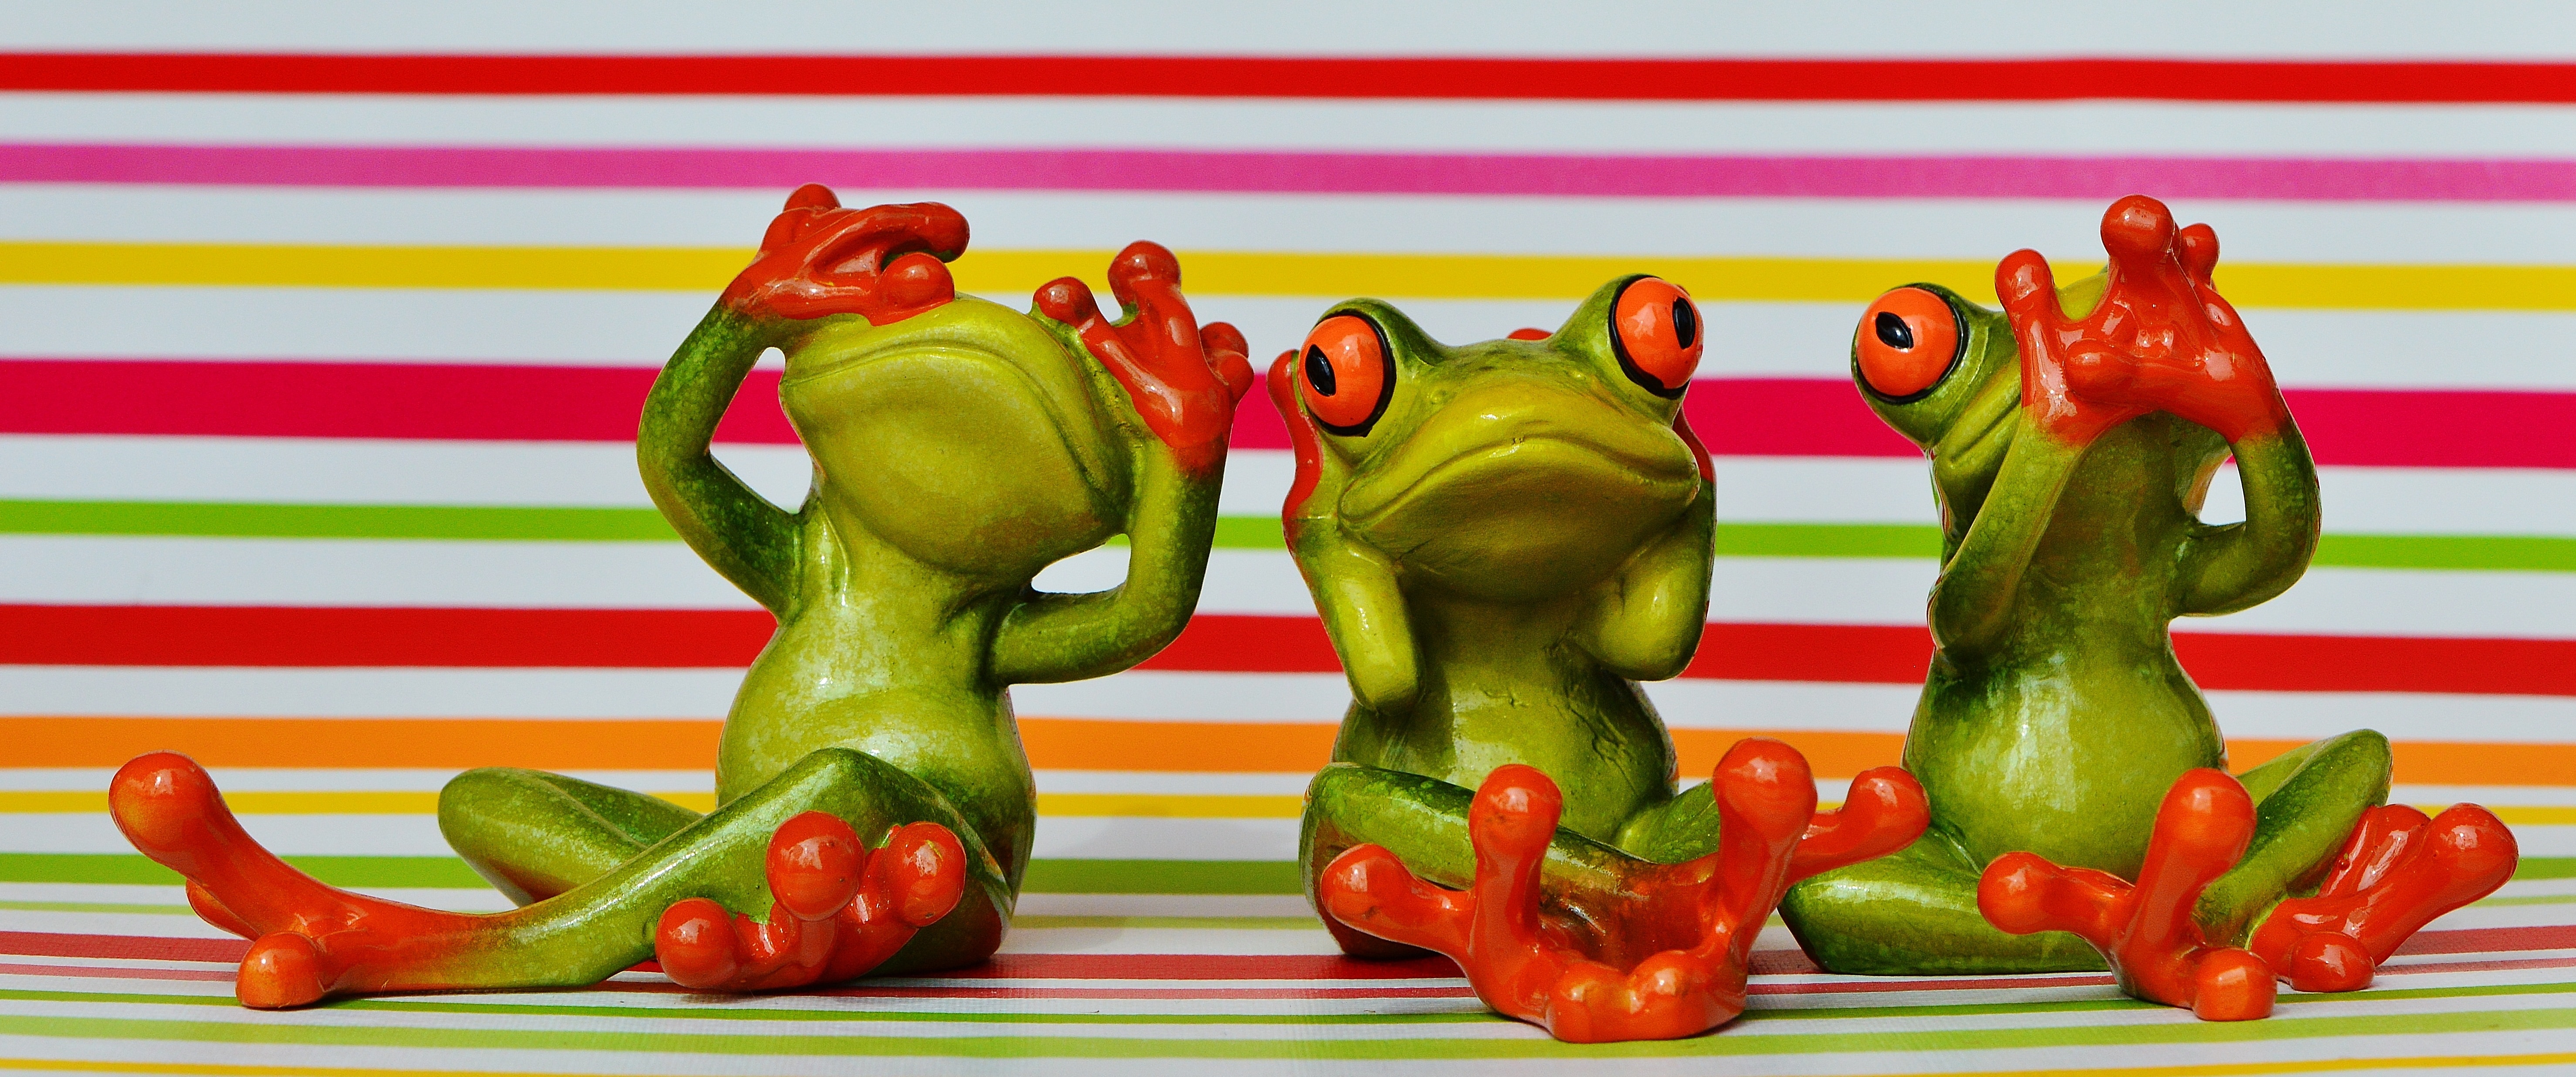 Not Hear, Frogs, Do Not Speak, Not See, red, green color